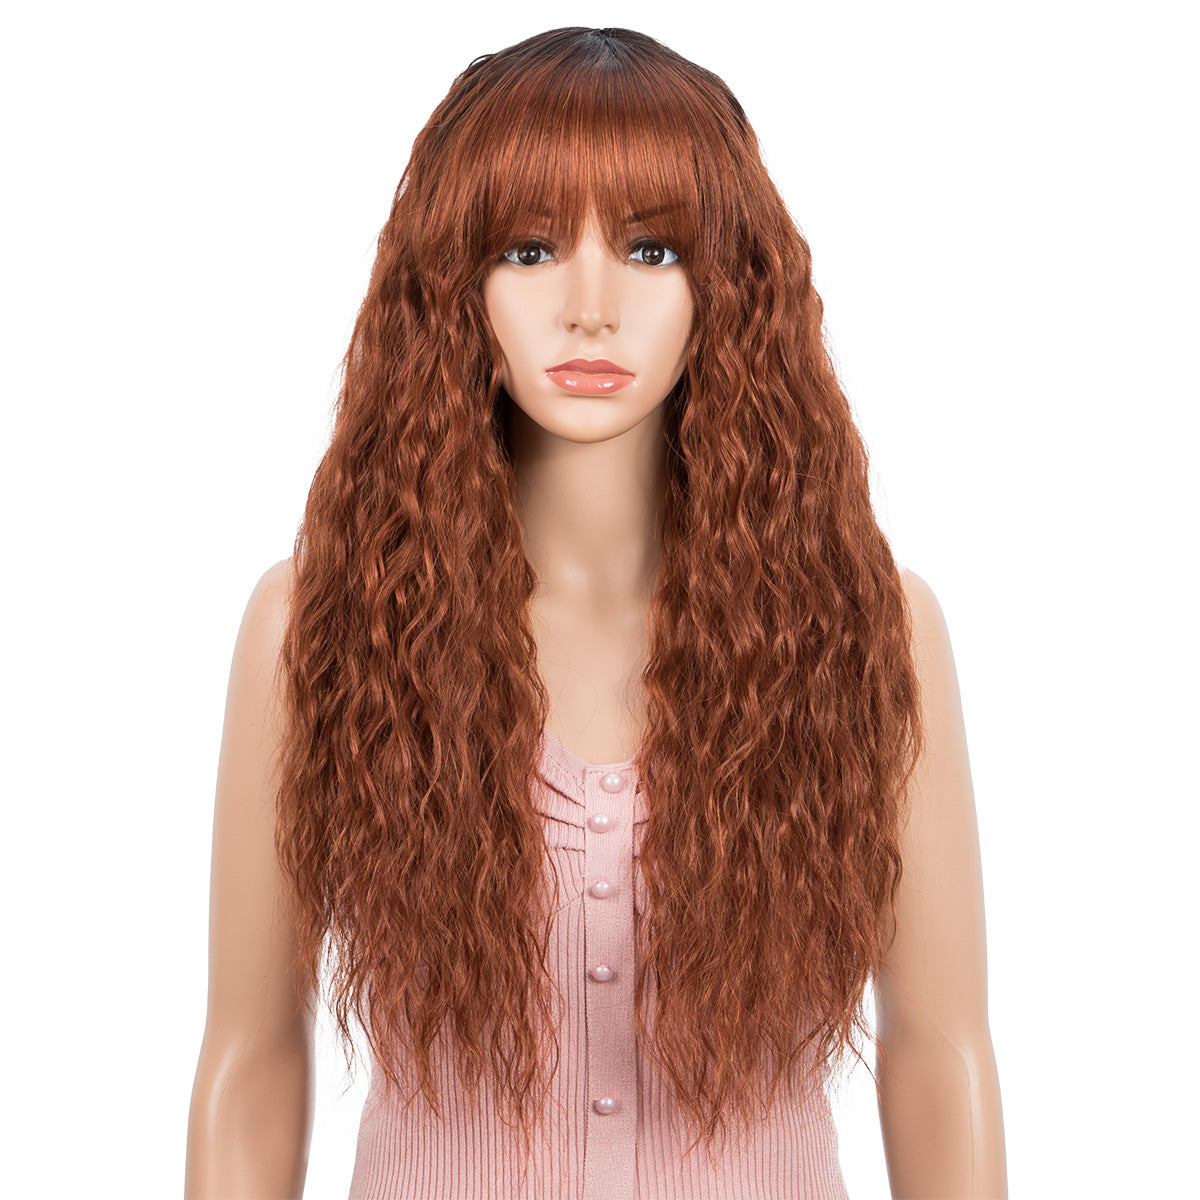 Clearance Sale 26 inch Curly Synthetic Wig Cinnamon Brown Wig